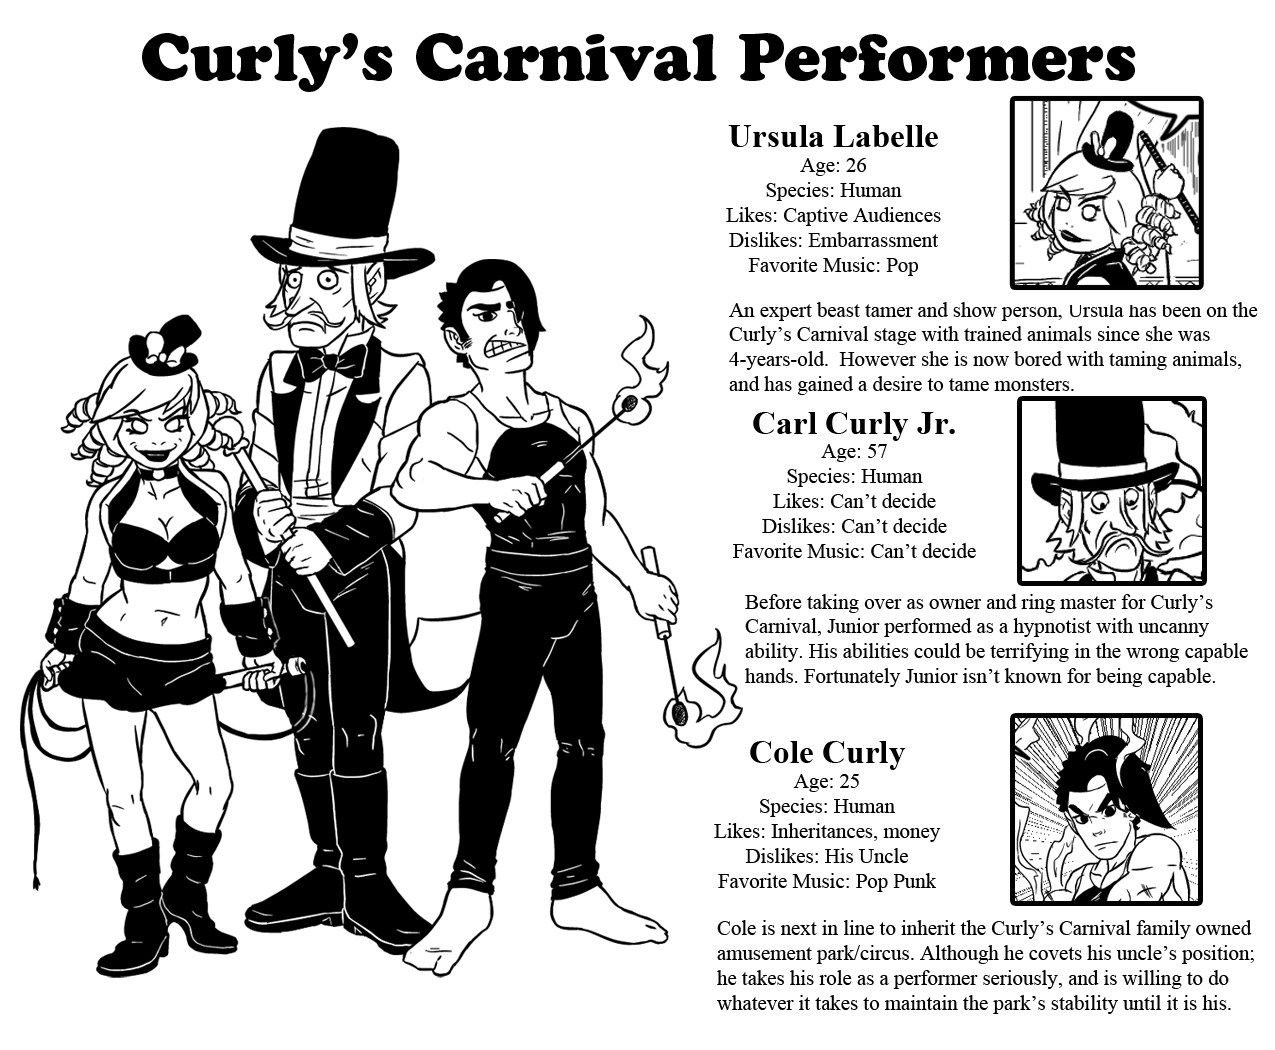 Curly’s Carnival Performers